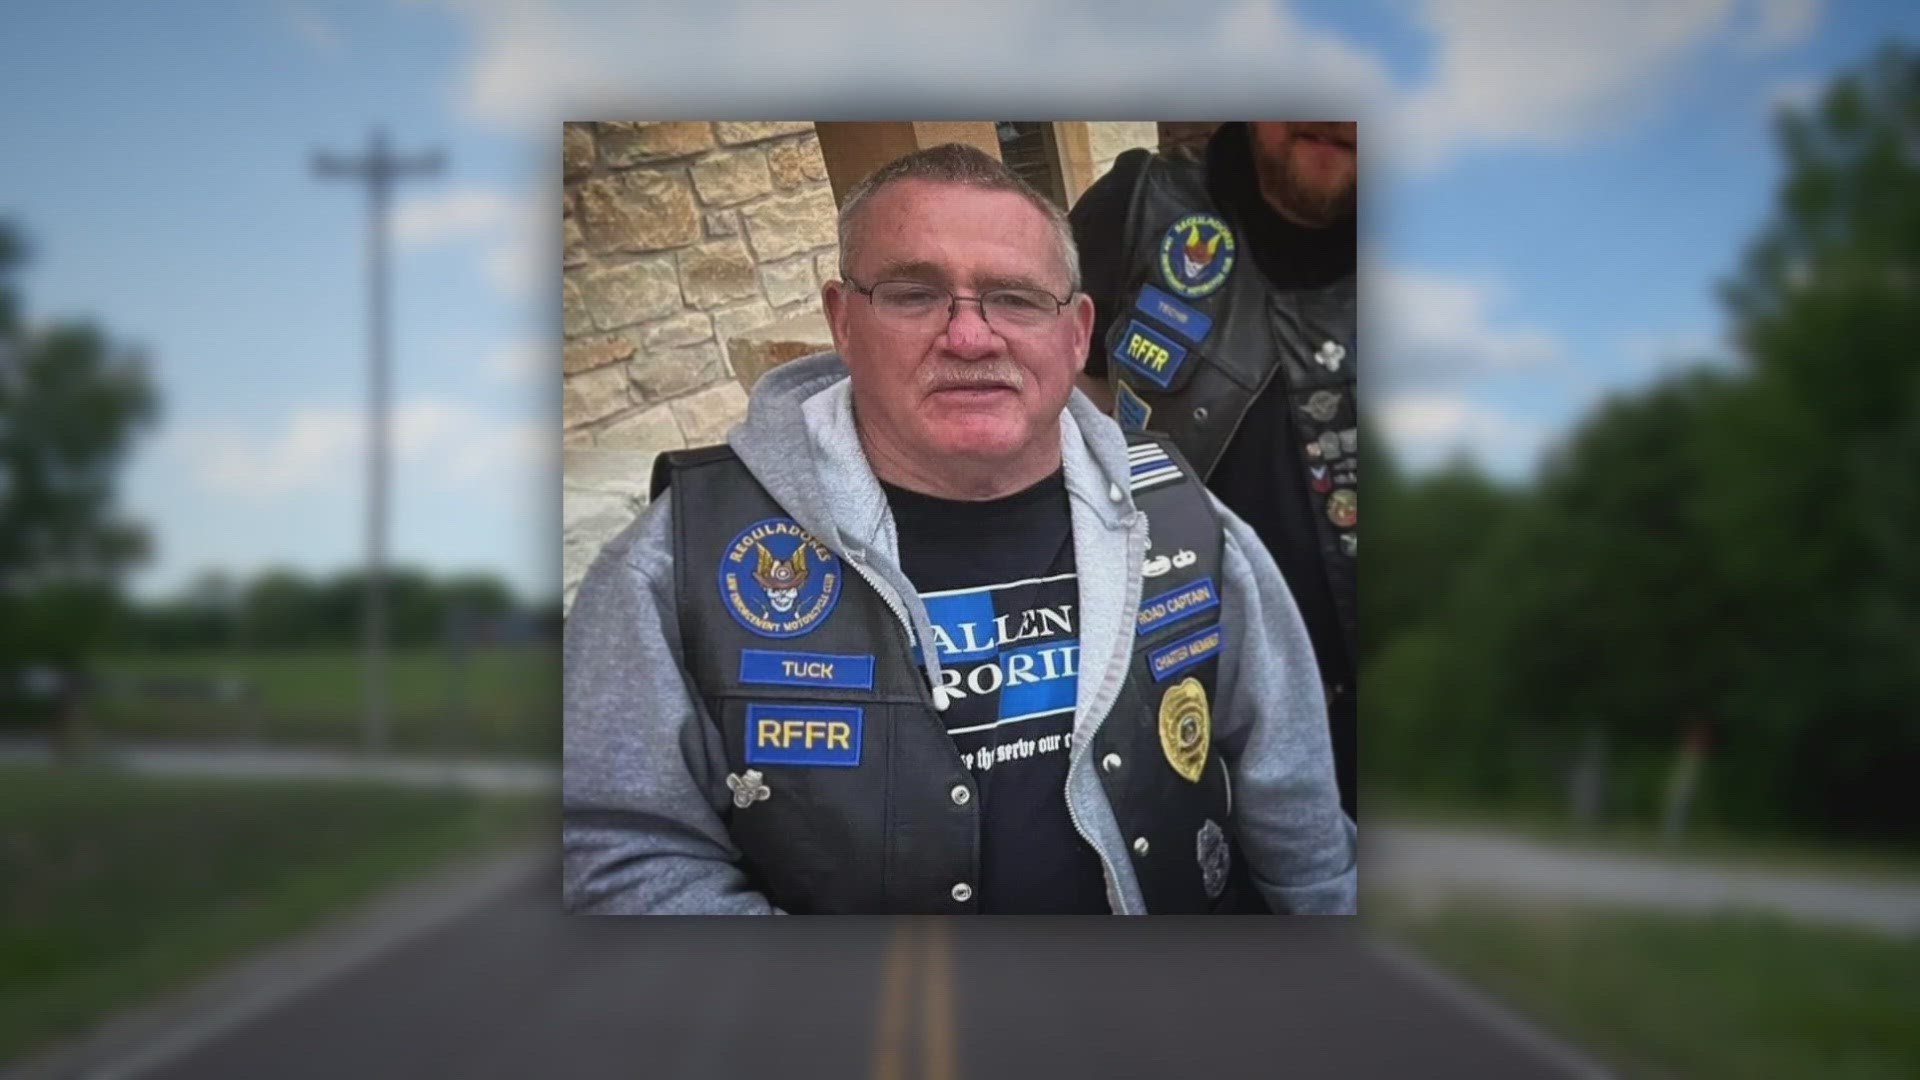 Lincoln County Sheriff's Deputy Steven Tucker died Saturday night in a motorcycle crash. His loved ones said cared deeply about his family and community.